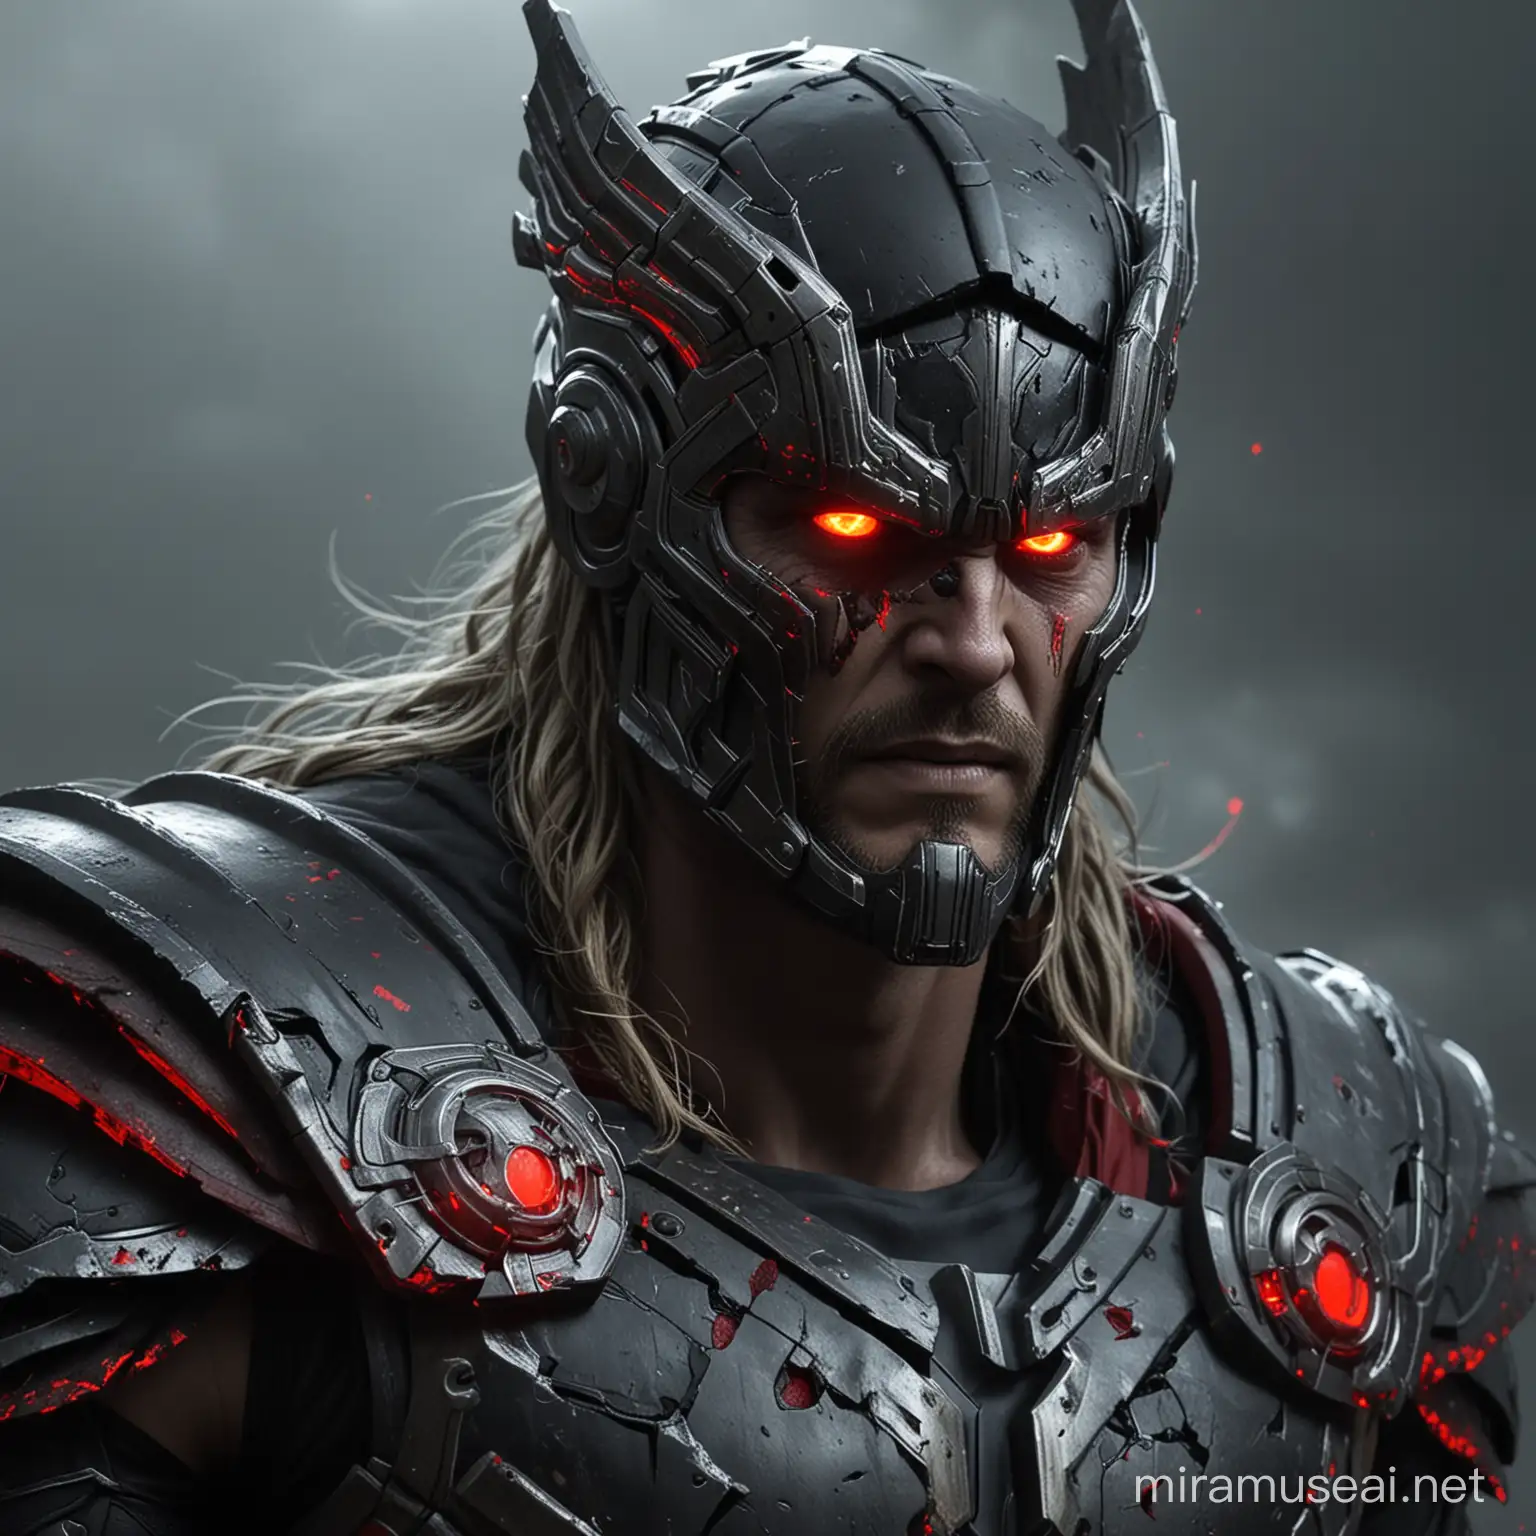 Corrupted thor with dark armor and glowing red eyes